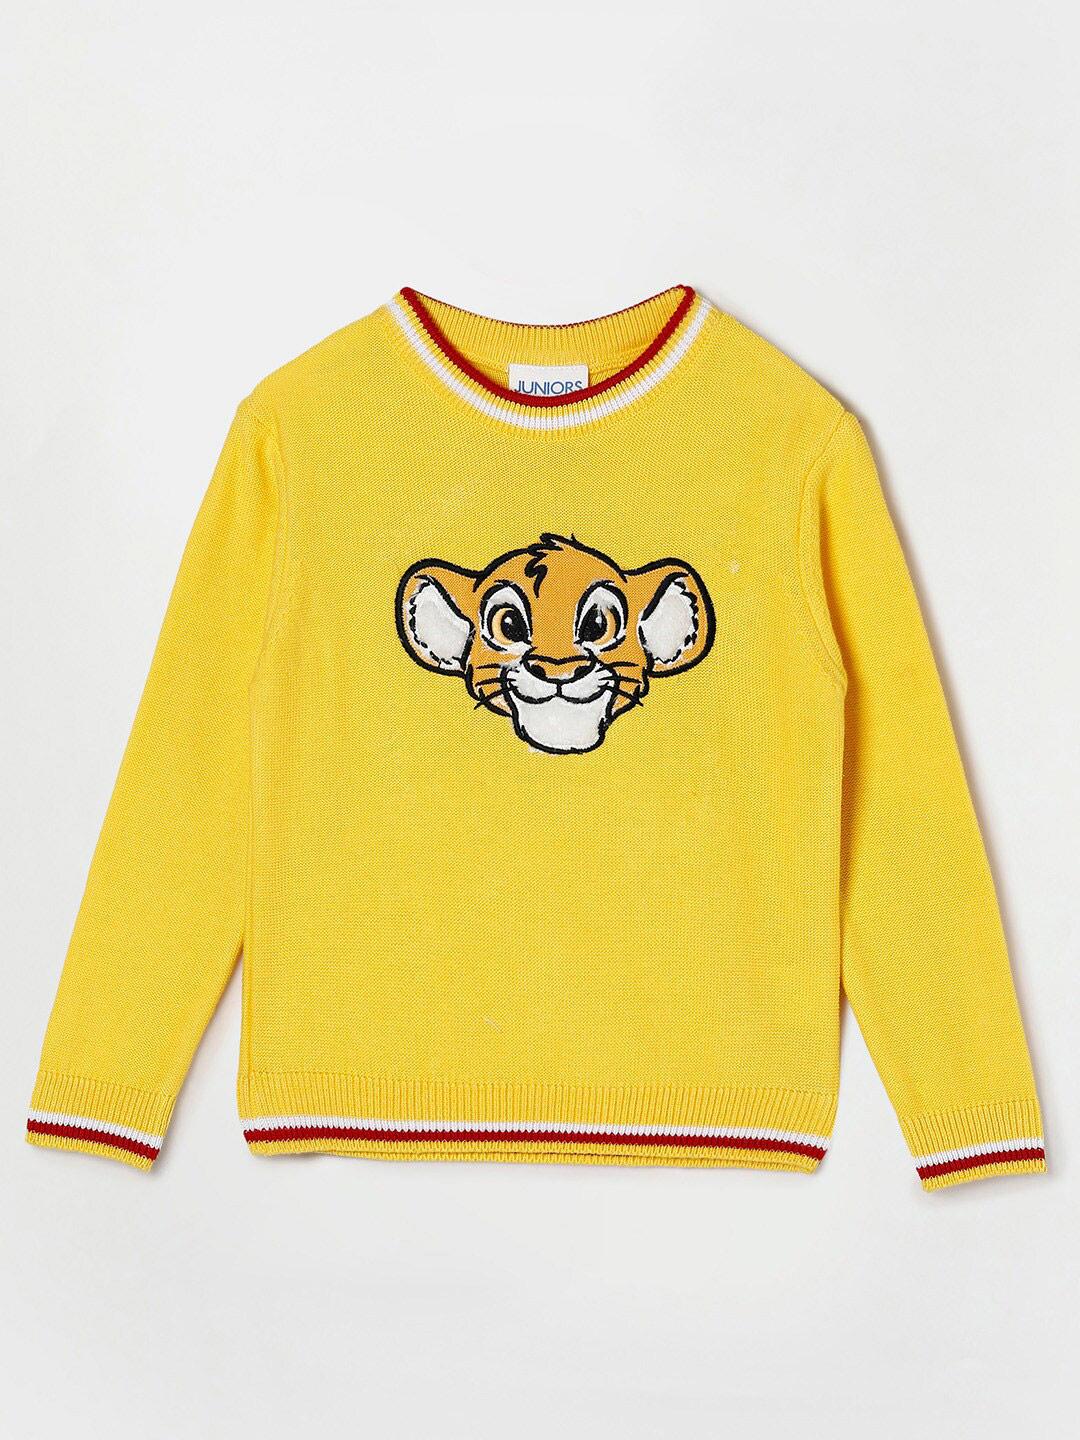 Juniors by Lifestyle Boys Yellow & White Printed Pullover